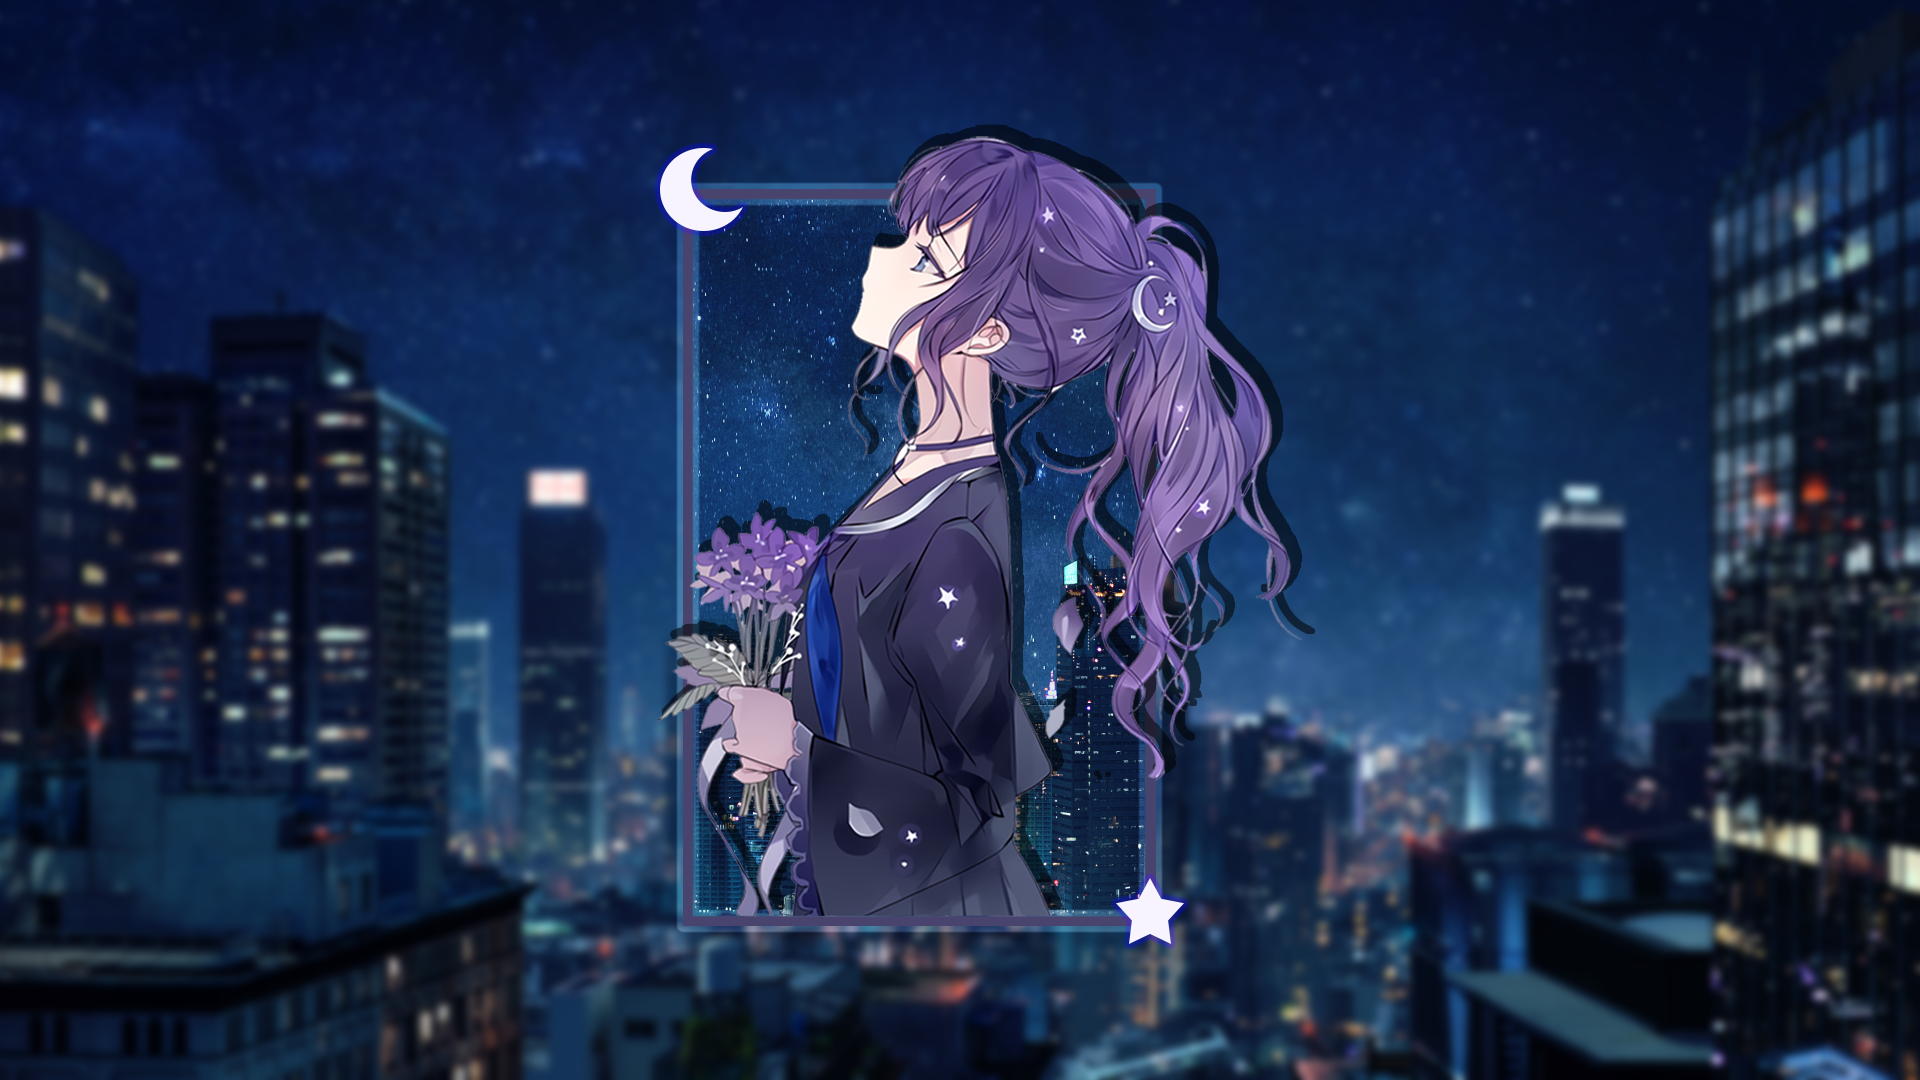 Anime 1920x1080 picture-in-picture anime girls city urban night stars Project Sekai Colorful Stage! feat. Hatsune Miku Project Sekai Colorful Stage purple hair crescent moon Moon city lights simple background